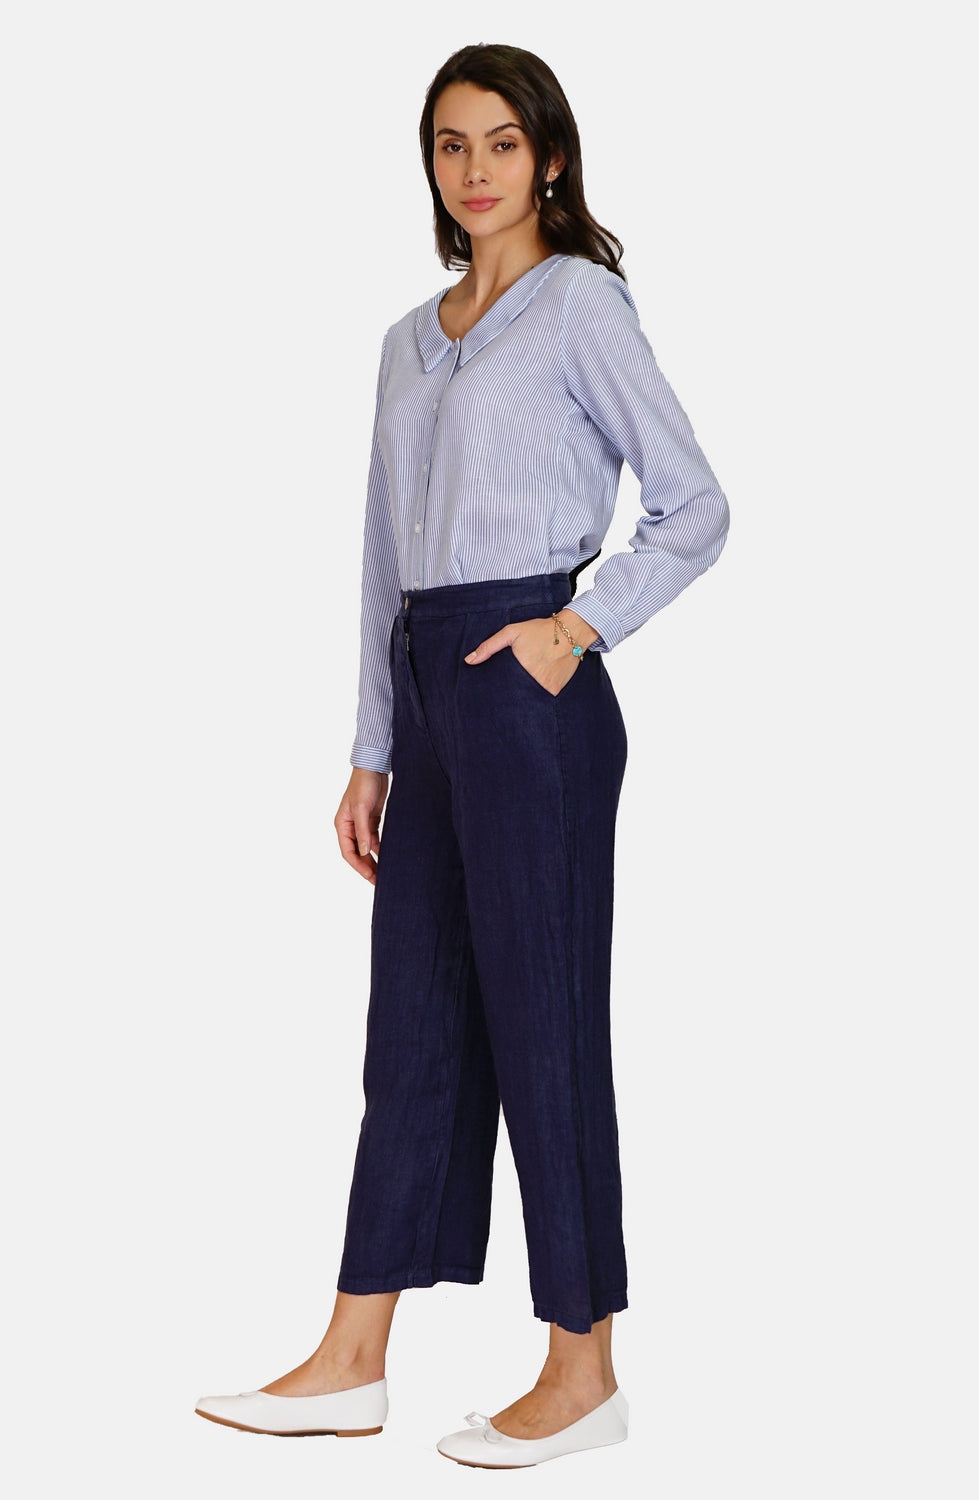 High-waisted zip-up pants with side pockets